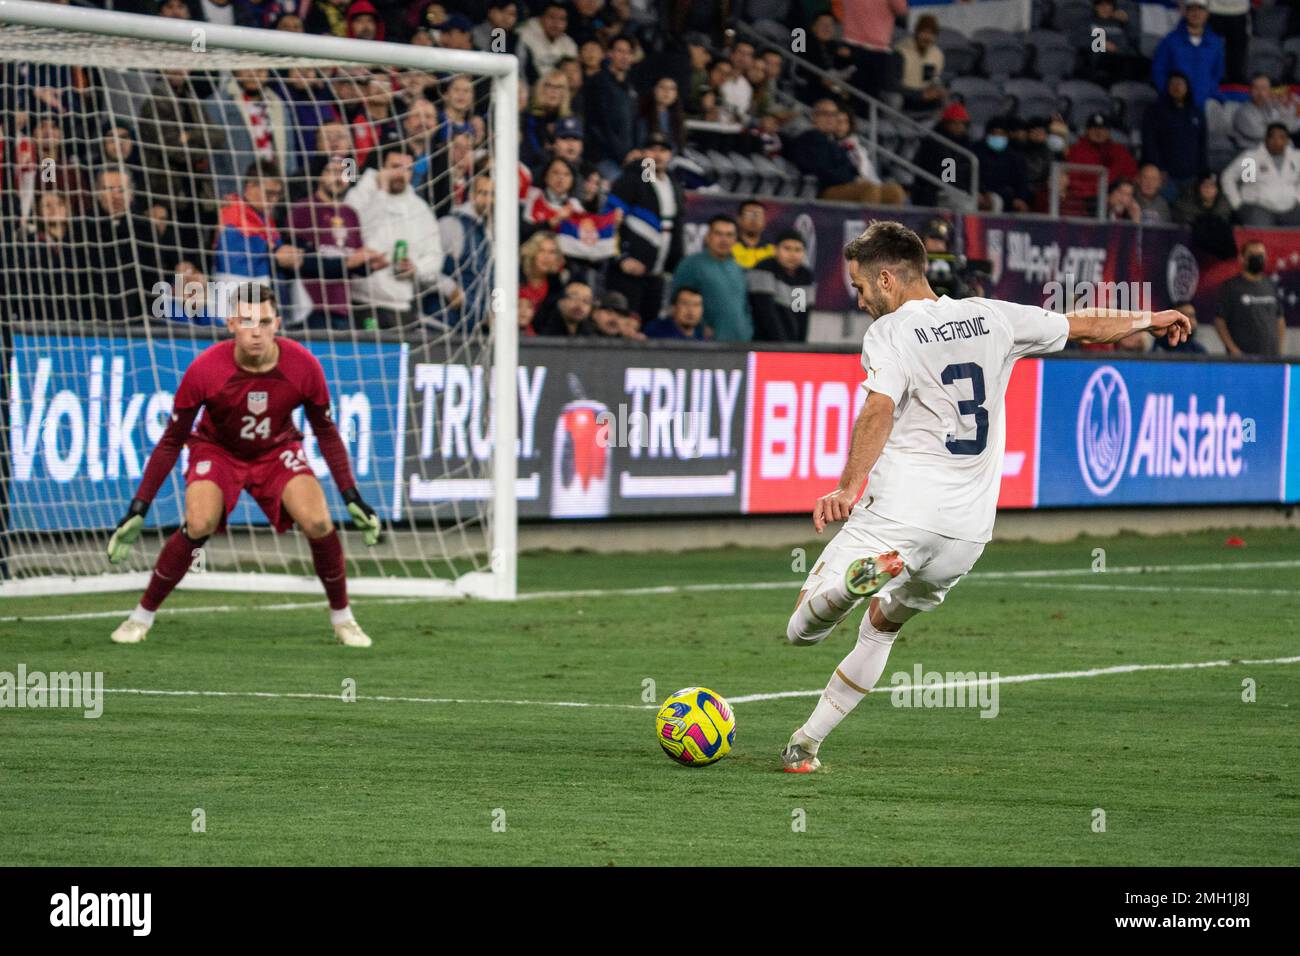 Serbia defender Nemanja Petrović (3) sends a pass in the box as United States of America goalkeeper Gaga Slonina (24) defends during an international Stock Photo